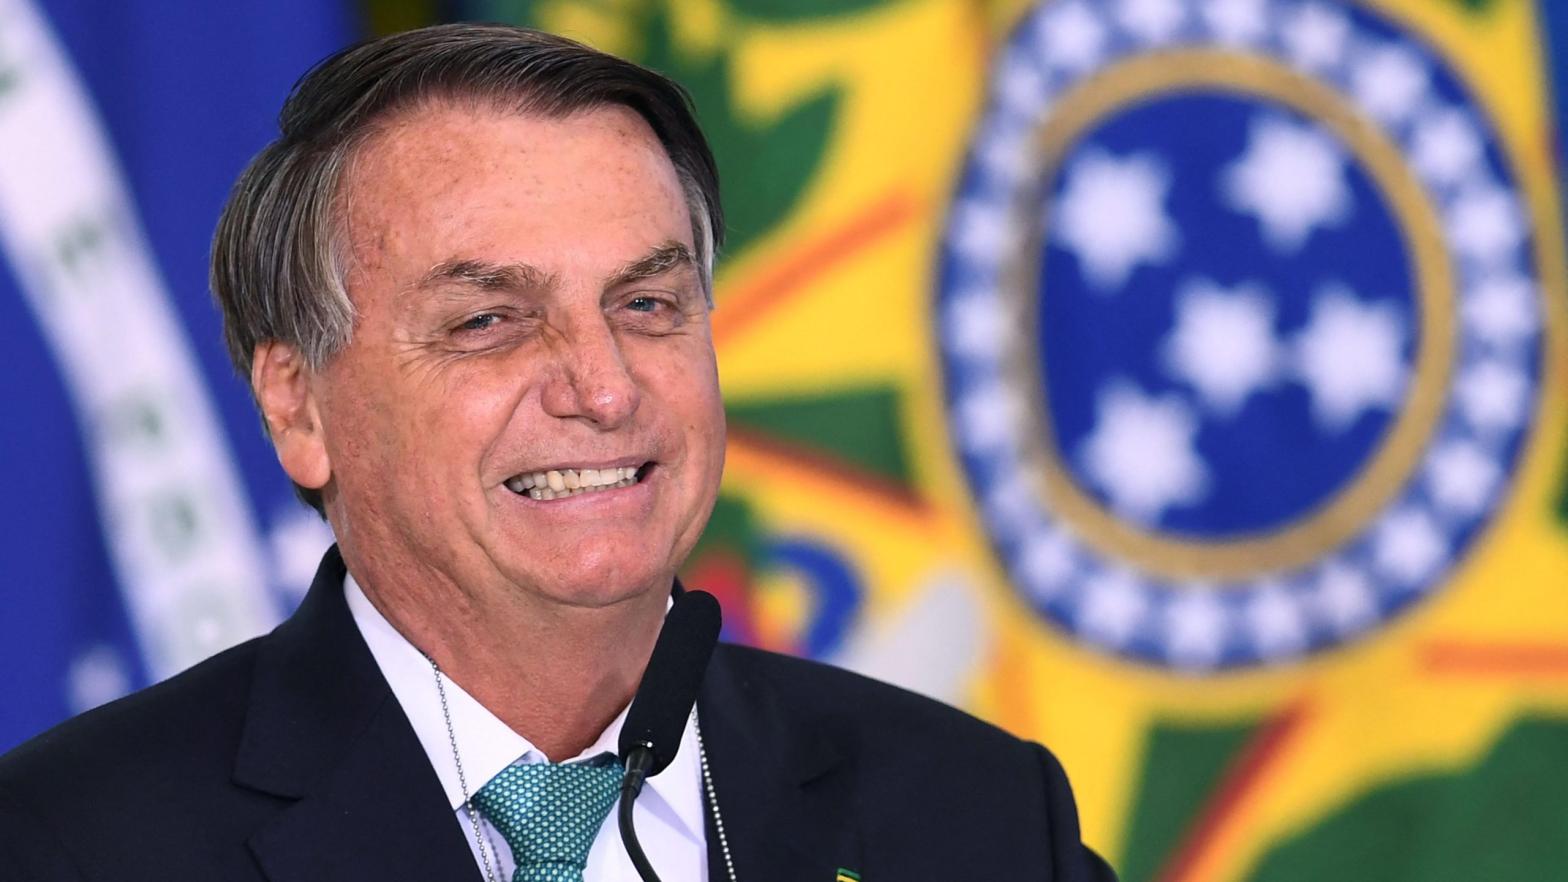 Brazilian President Jair Bolsonaro speaking at the Planalto Palace in Brasilia following the announcement Brazil's Olympic team will be sponsored by the Caixa Economica Federal state bank on June 1, 2021. (Photo: Evaristo SA / AFP, Getty Images)